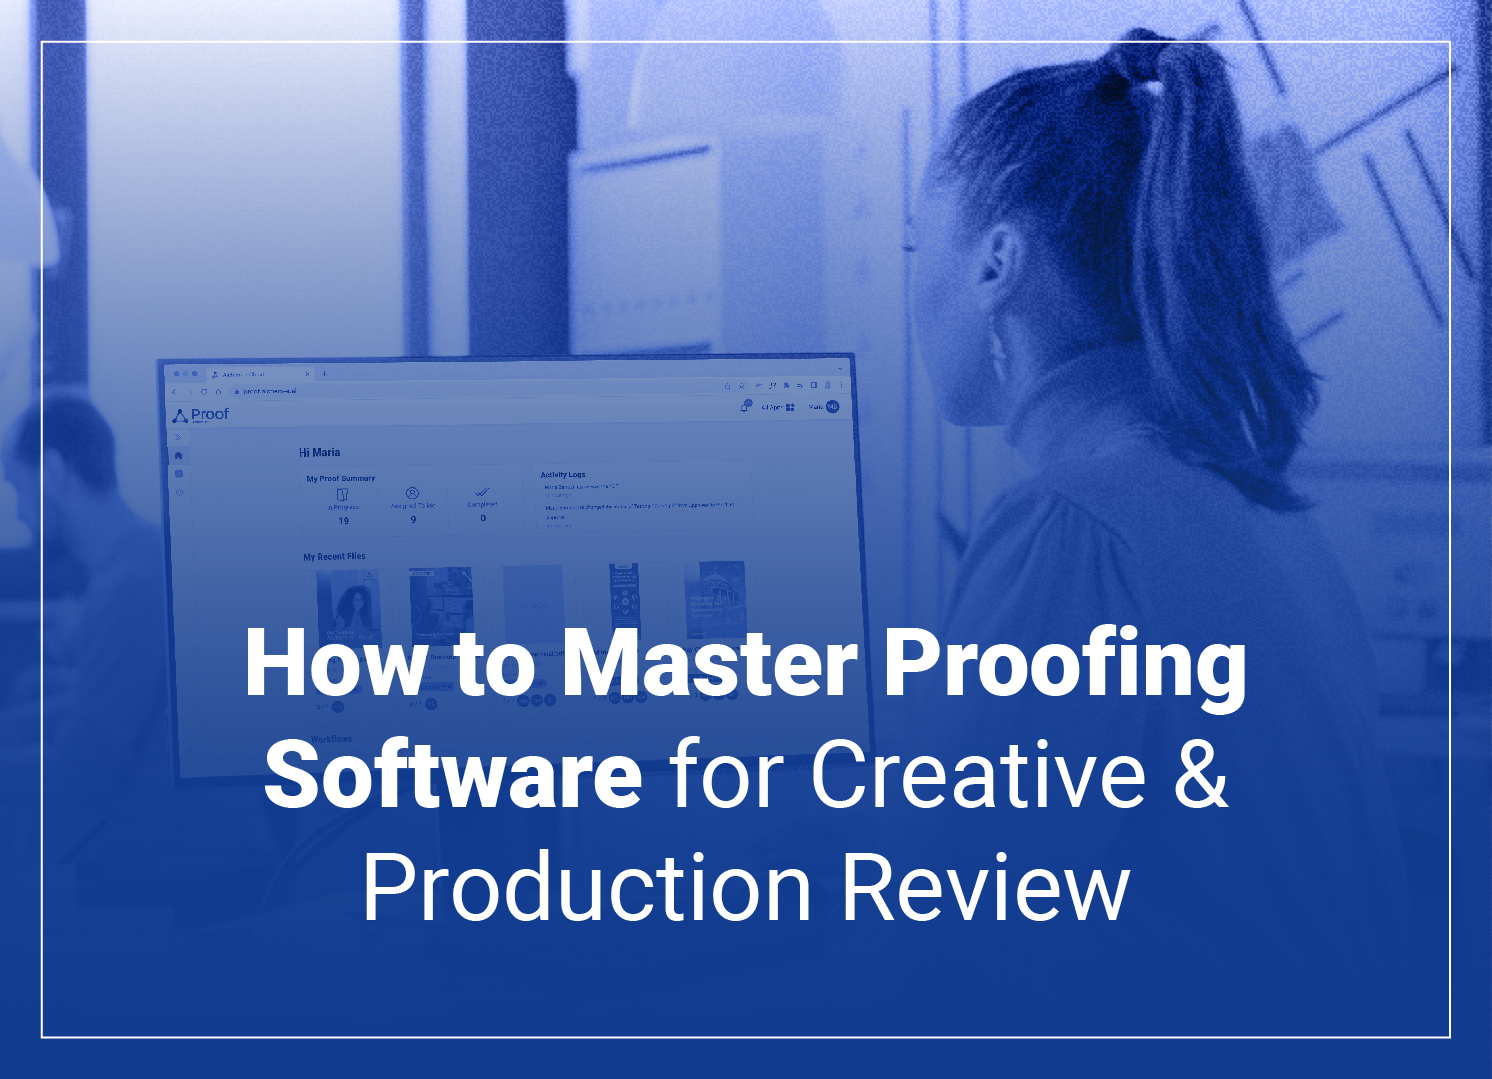 How to Master Proofing Software for Creative & Production Review